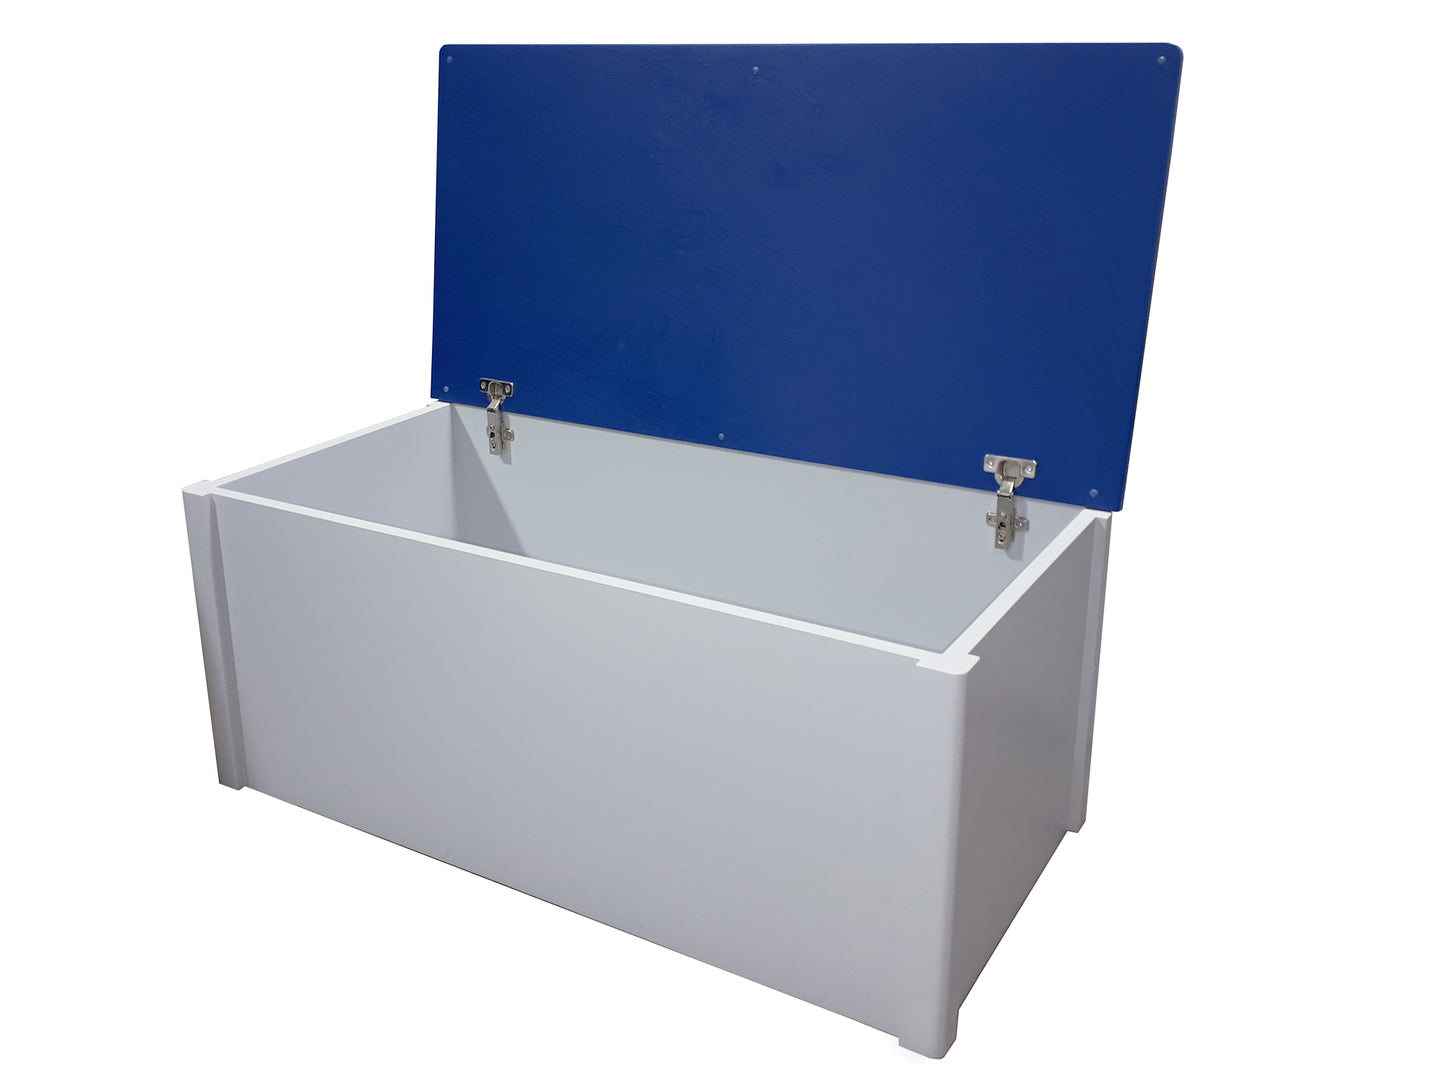 Dunbar Blanket Box shown in dove grey and bold blue 